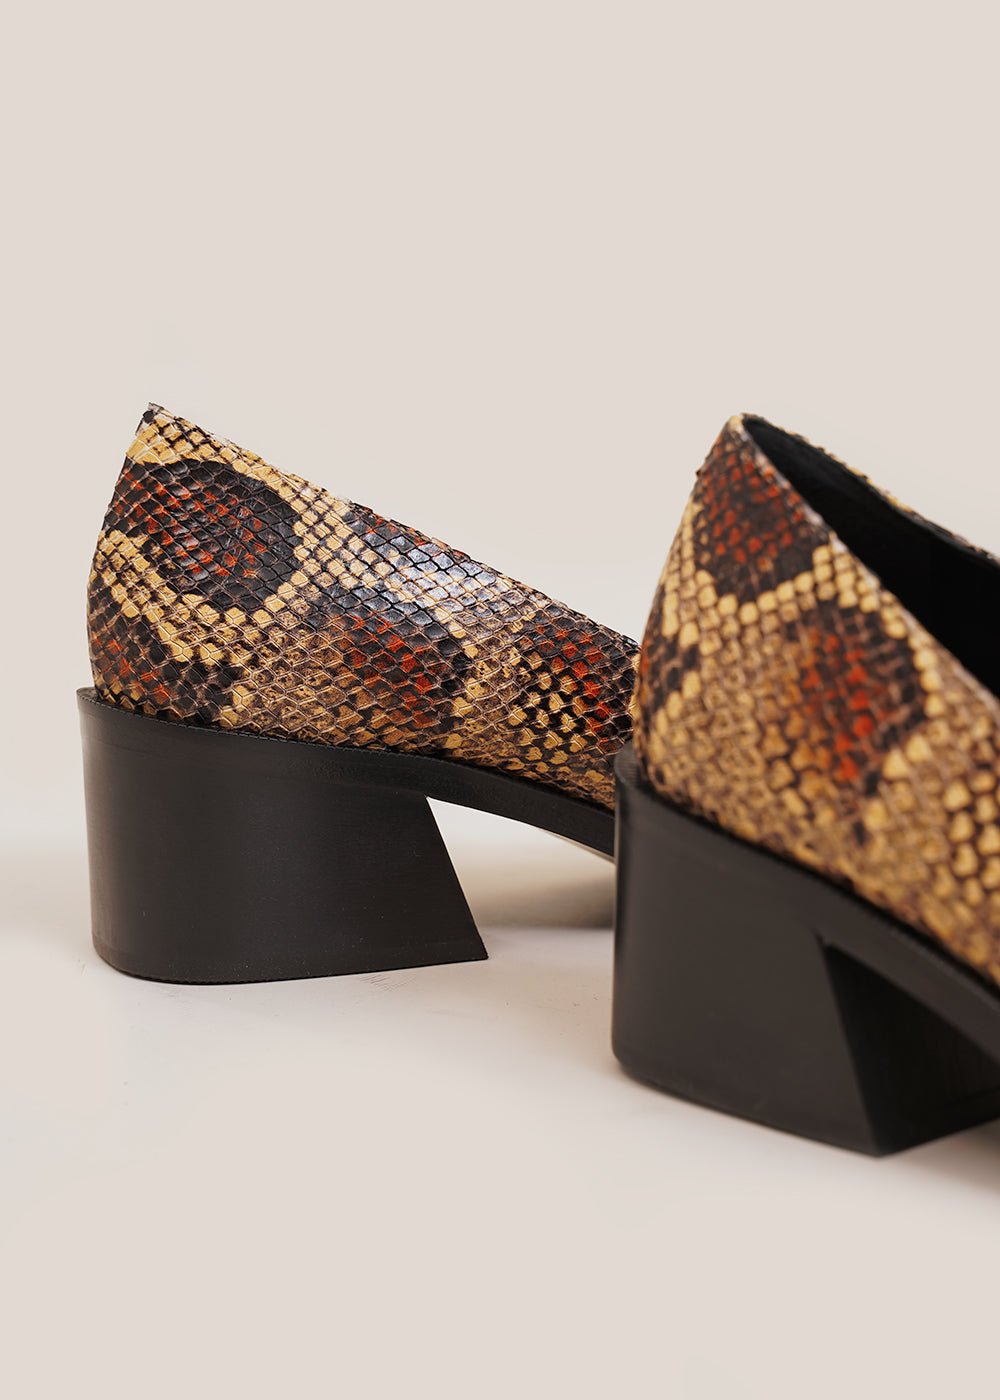 Suzanne Rae Faux Snake Wide Toe Pump - New Classics Studios Sustainable Ethical Fashion Canada